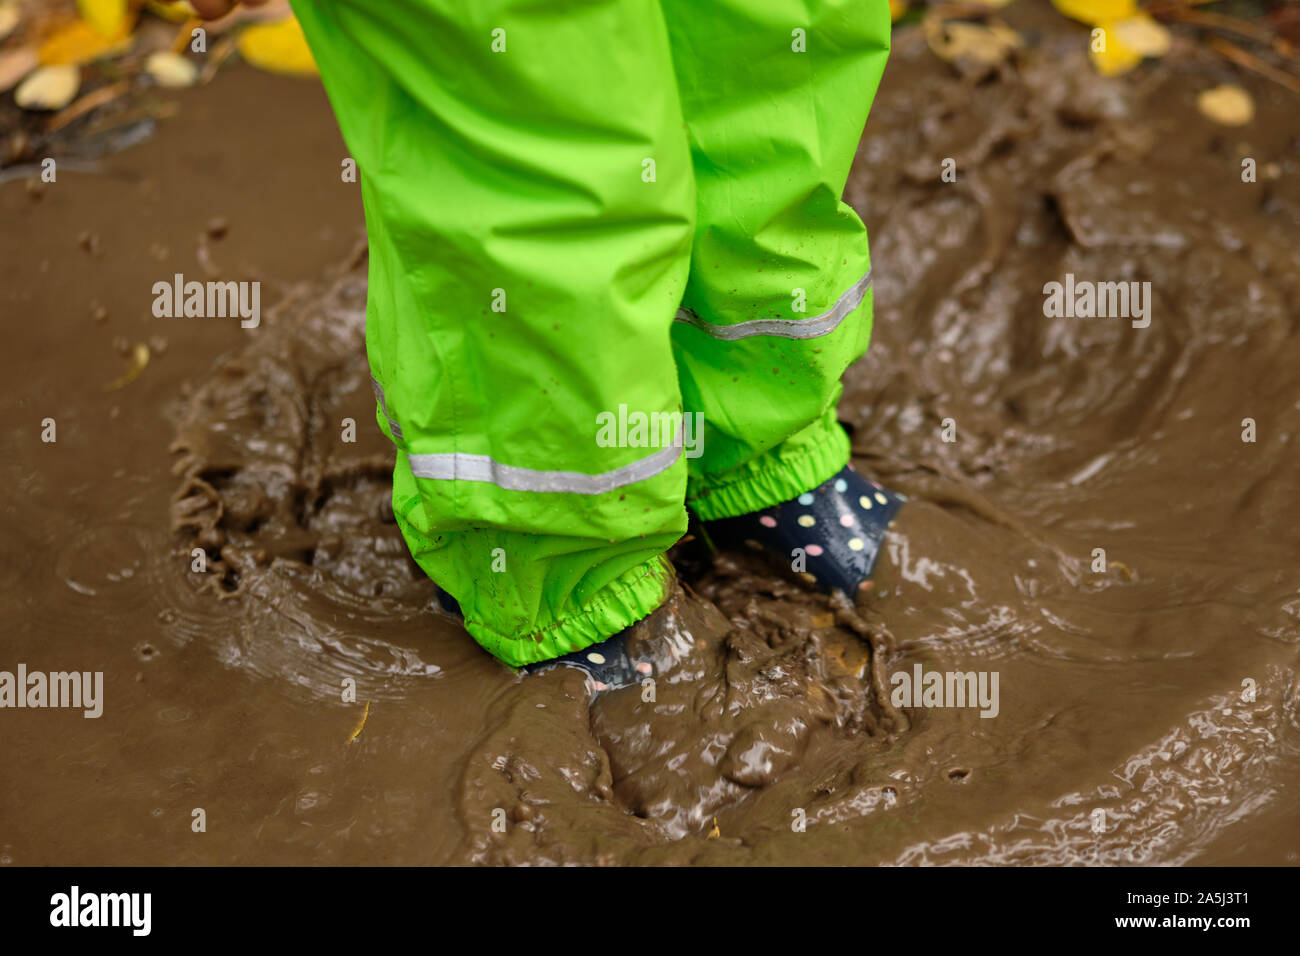 Low section of a child in green waterproof pants and rubber boots standing in a brown muddy puddle in the forest with fallen autumn leaves on a rainy Stock Photo